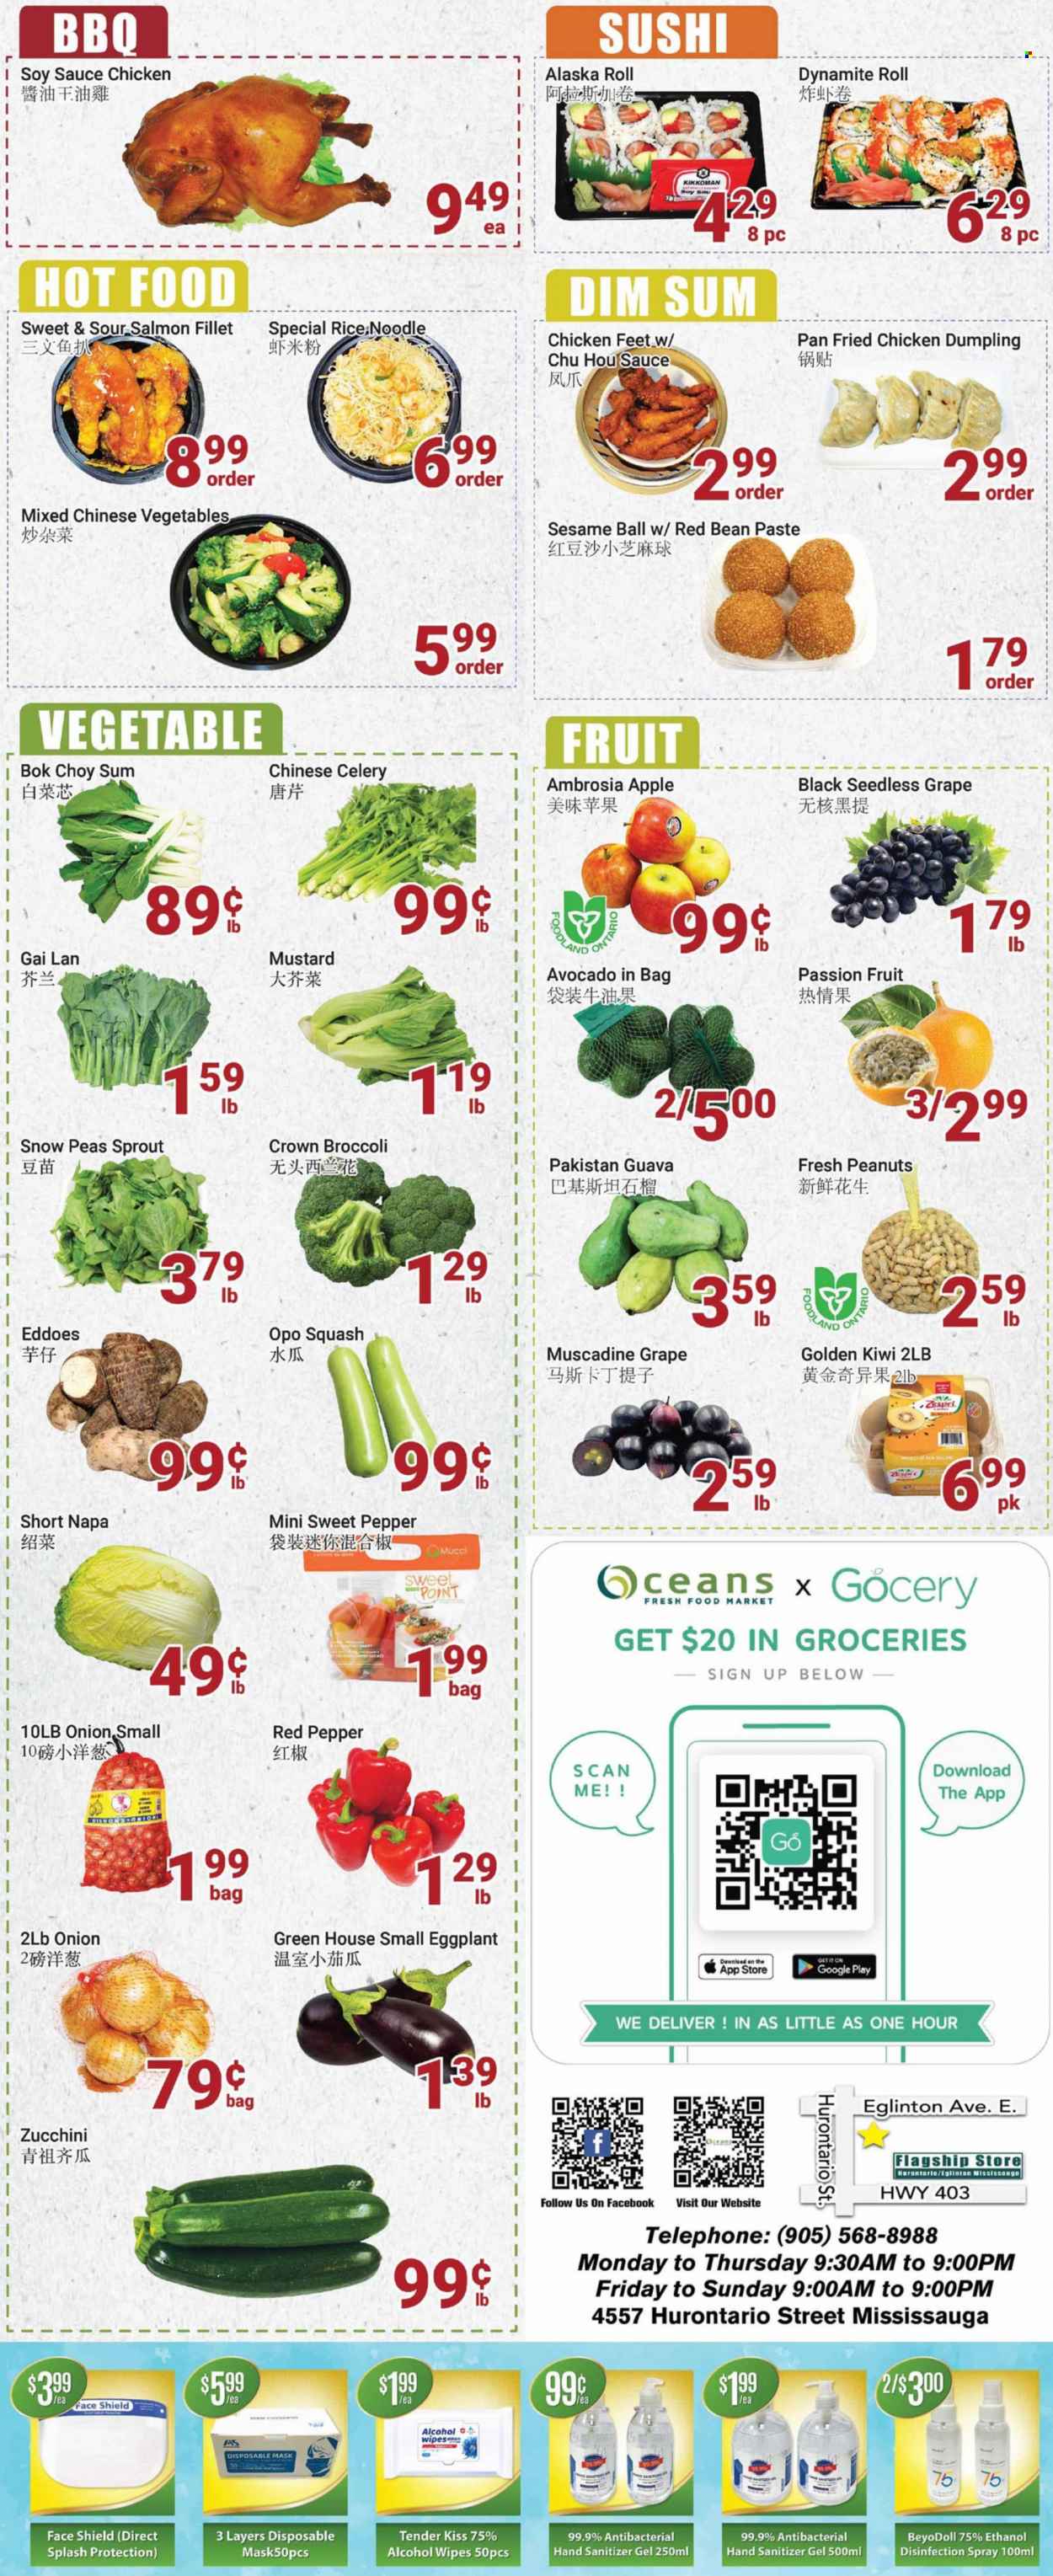 thumbnail - Oceans Flyer - October 15, 2021 - October 21, 2021 - Sales products - bok choy, broccoli, celery, zucchini, peas, onion, eggplant, avocado, guava, salmon, salmon fillet, sauce, fried chicken, dumplings, noodles, snow peas, rice, mustard, soy sauce, Kikkoman, peanuts, chicken paws, chicken, wipes, hand sanitizer, disposable mask, kiwi. Page 2.